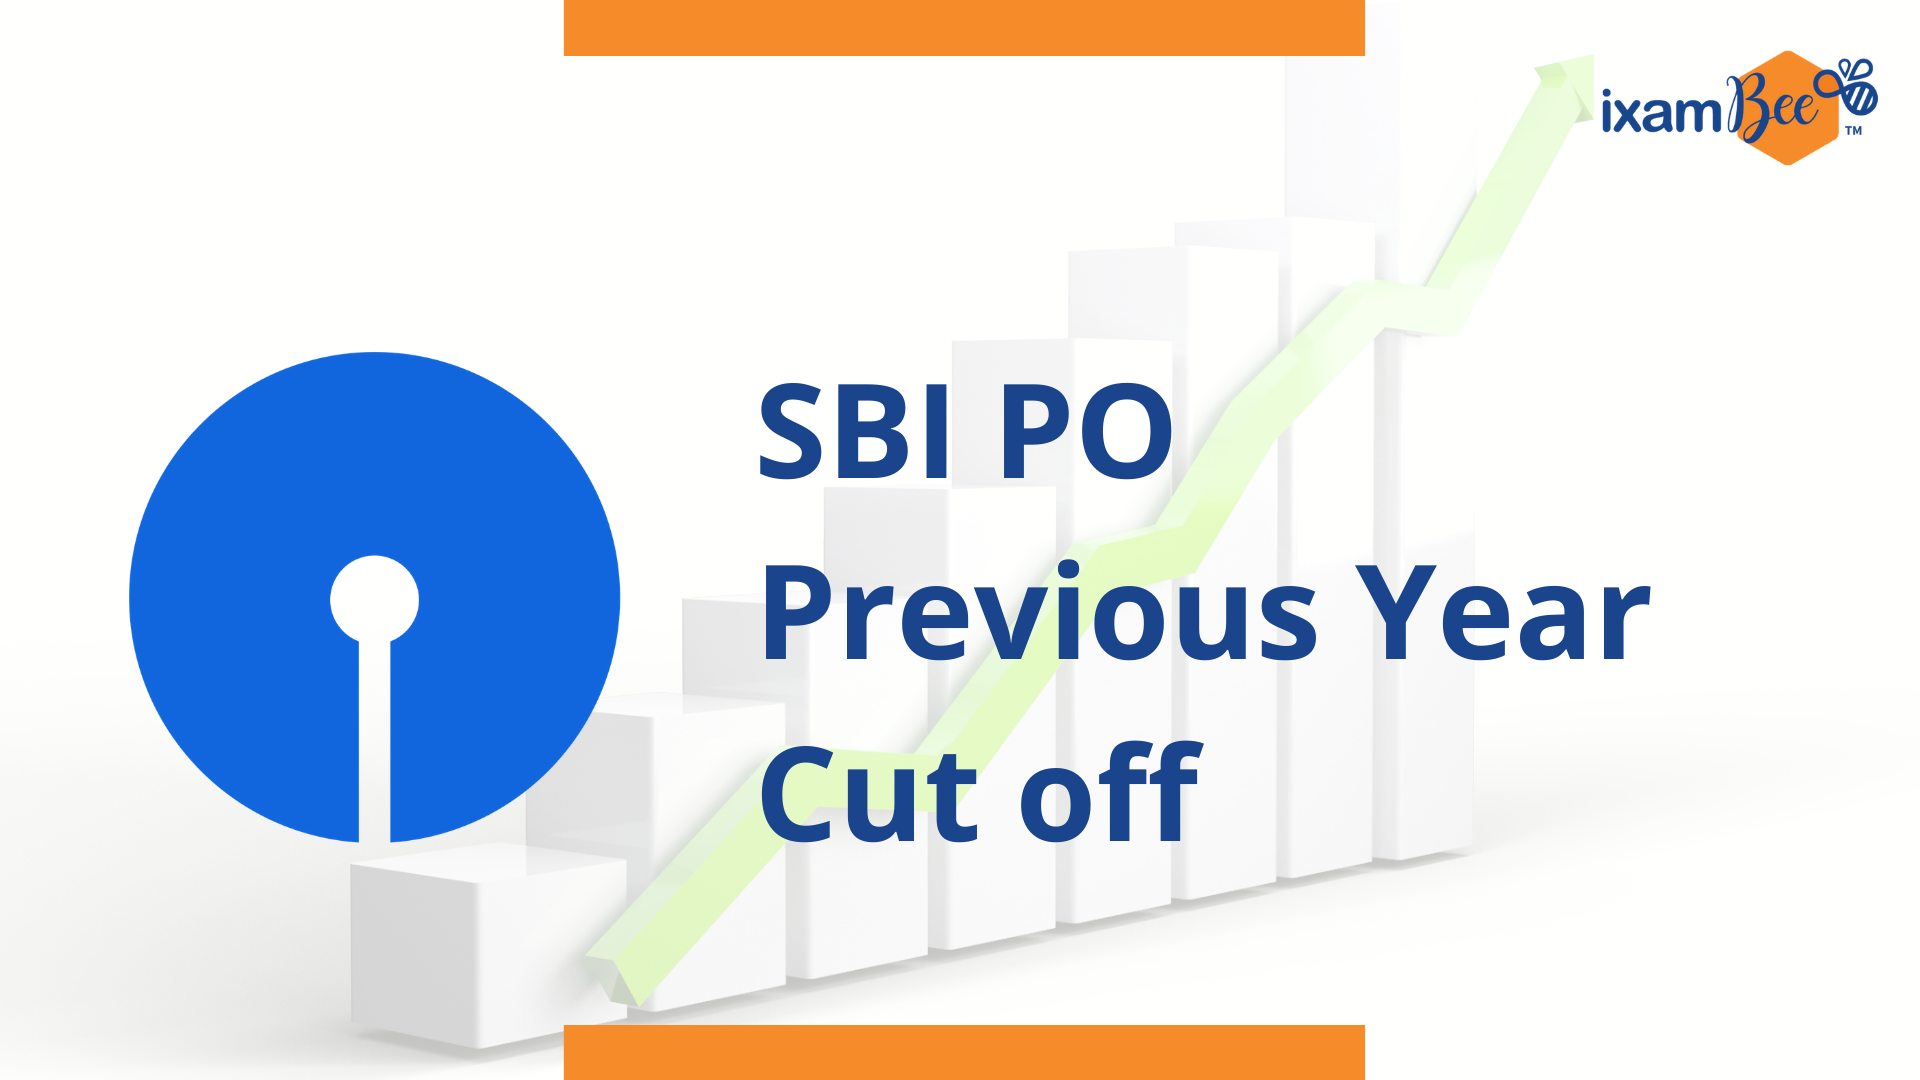 SBI PO Previous Year Cut Off